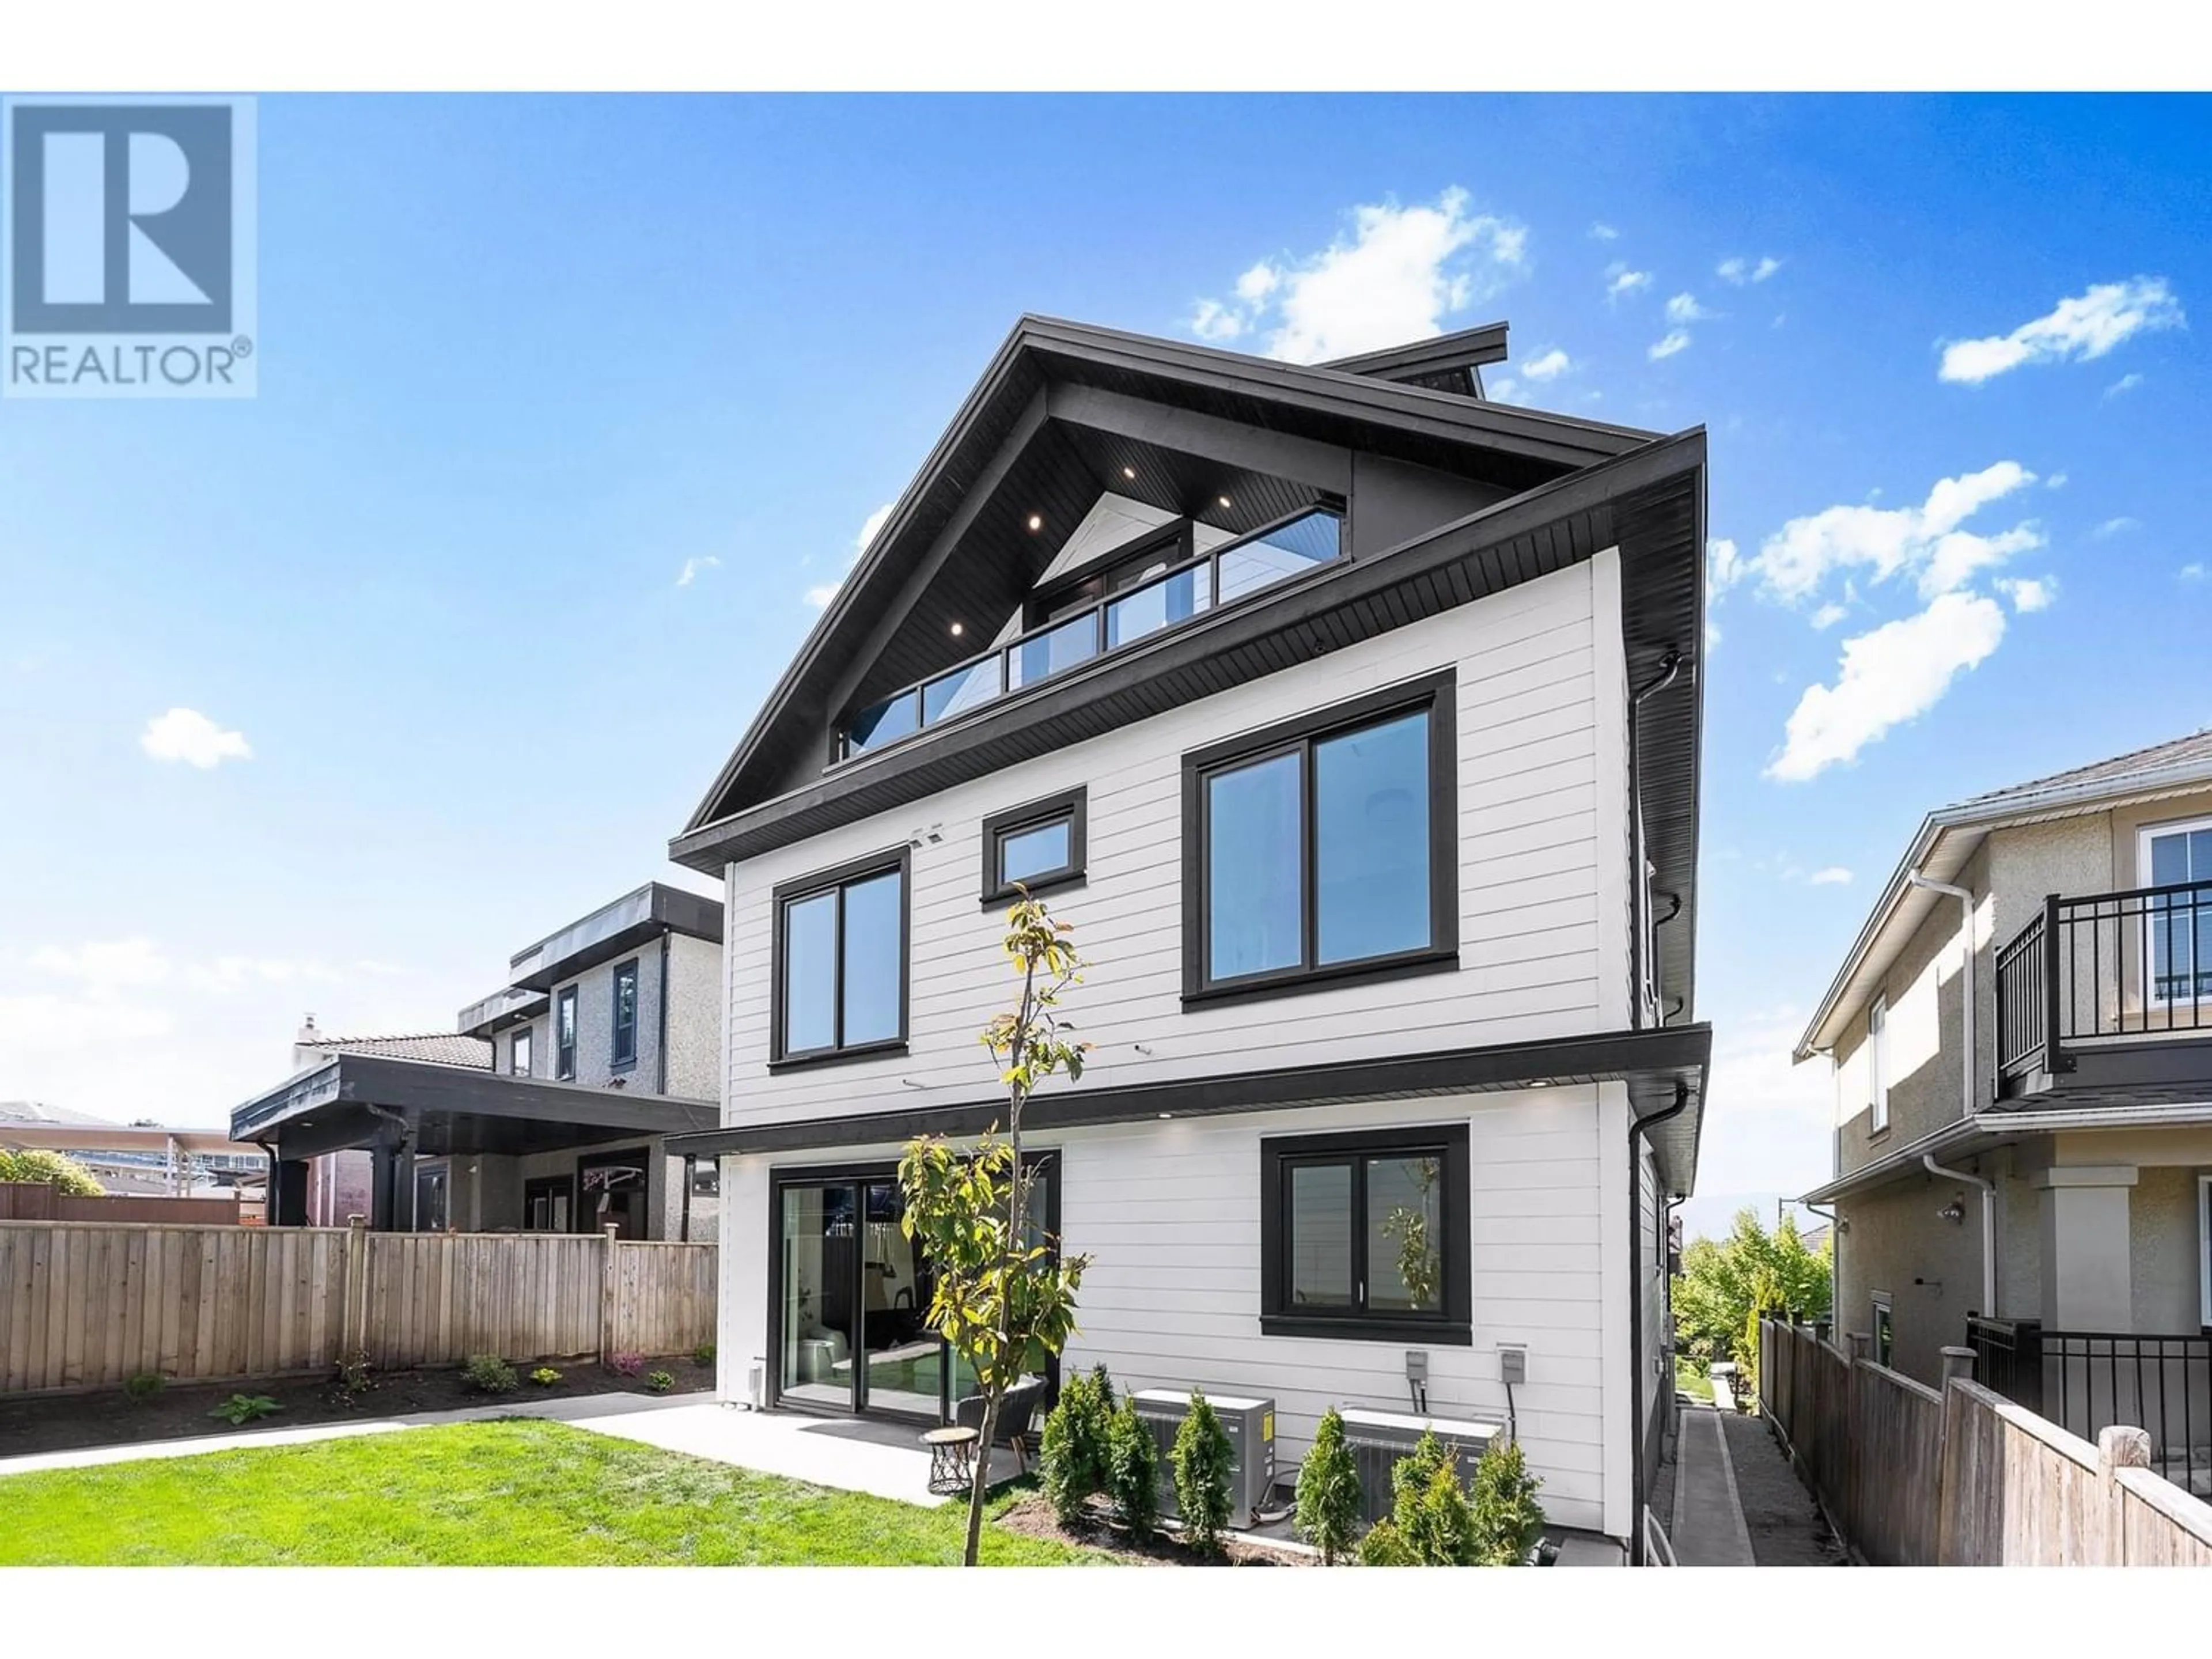 Frontside or backside of a home for 2 3378 SEAFORTH DRIVE, Vancouver British Columbia V5M4C5